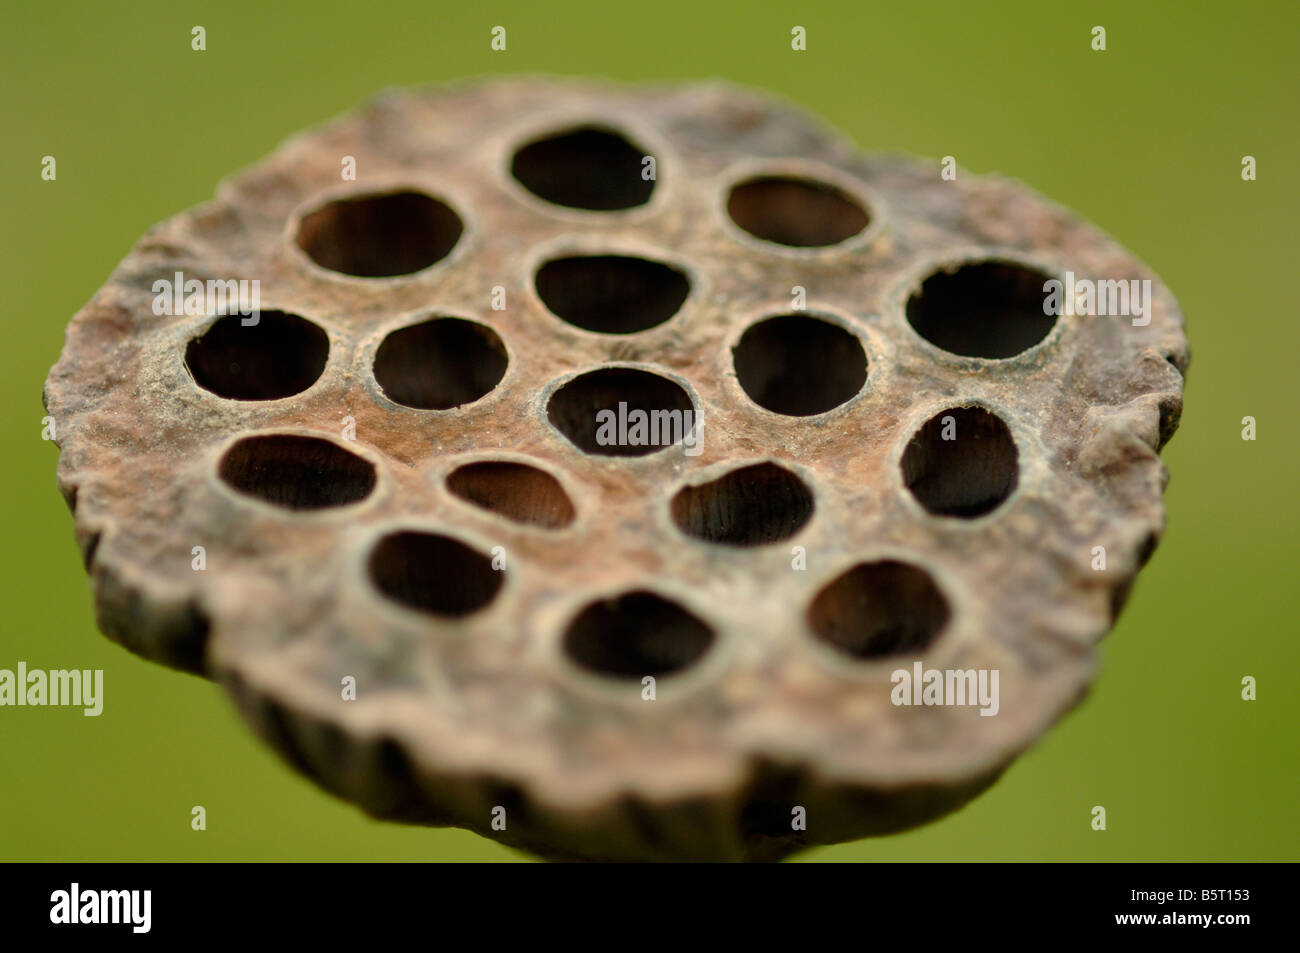 Lotus lily or sacred lotus dry fruit Nelumbo nucifera with holes where seeds were sited Stock Photo